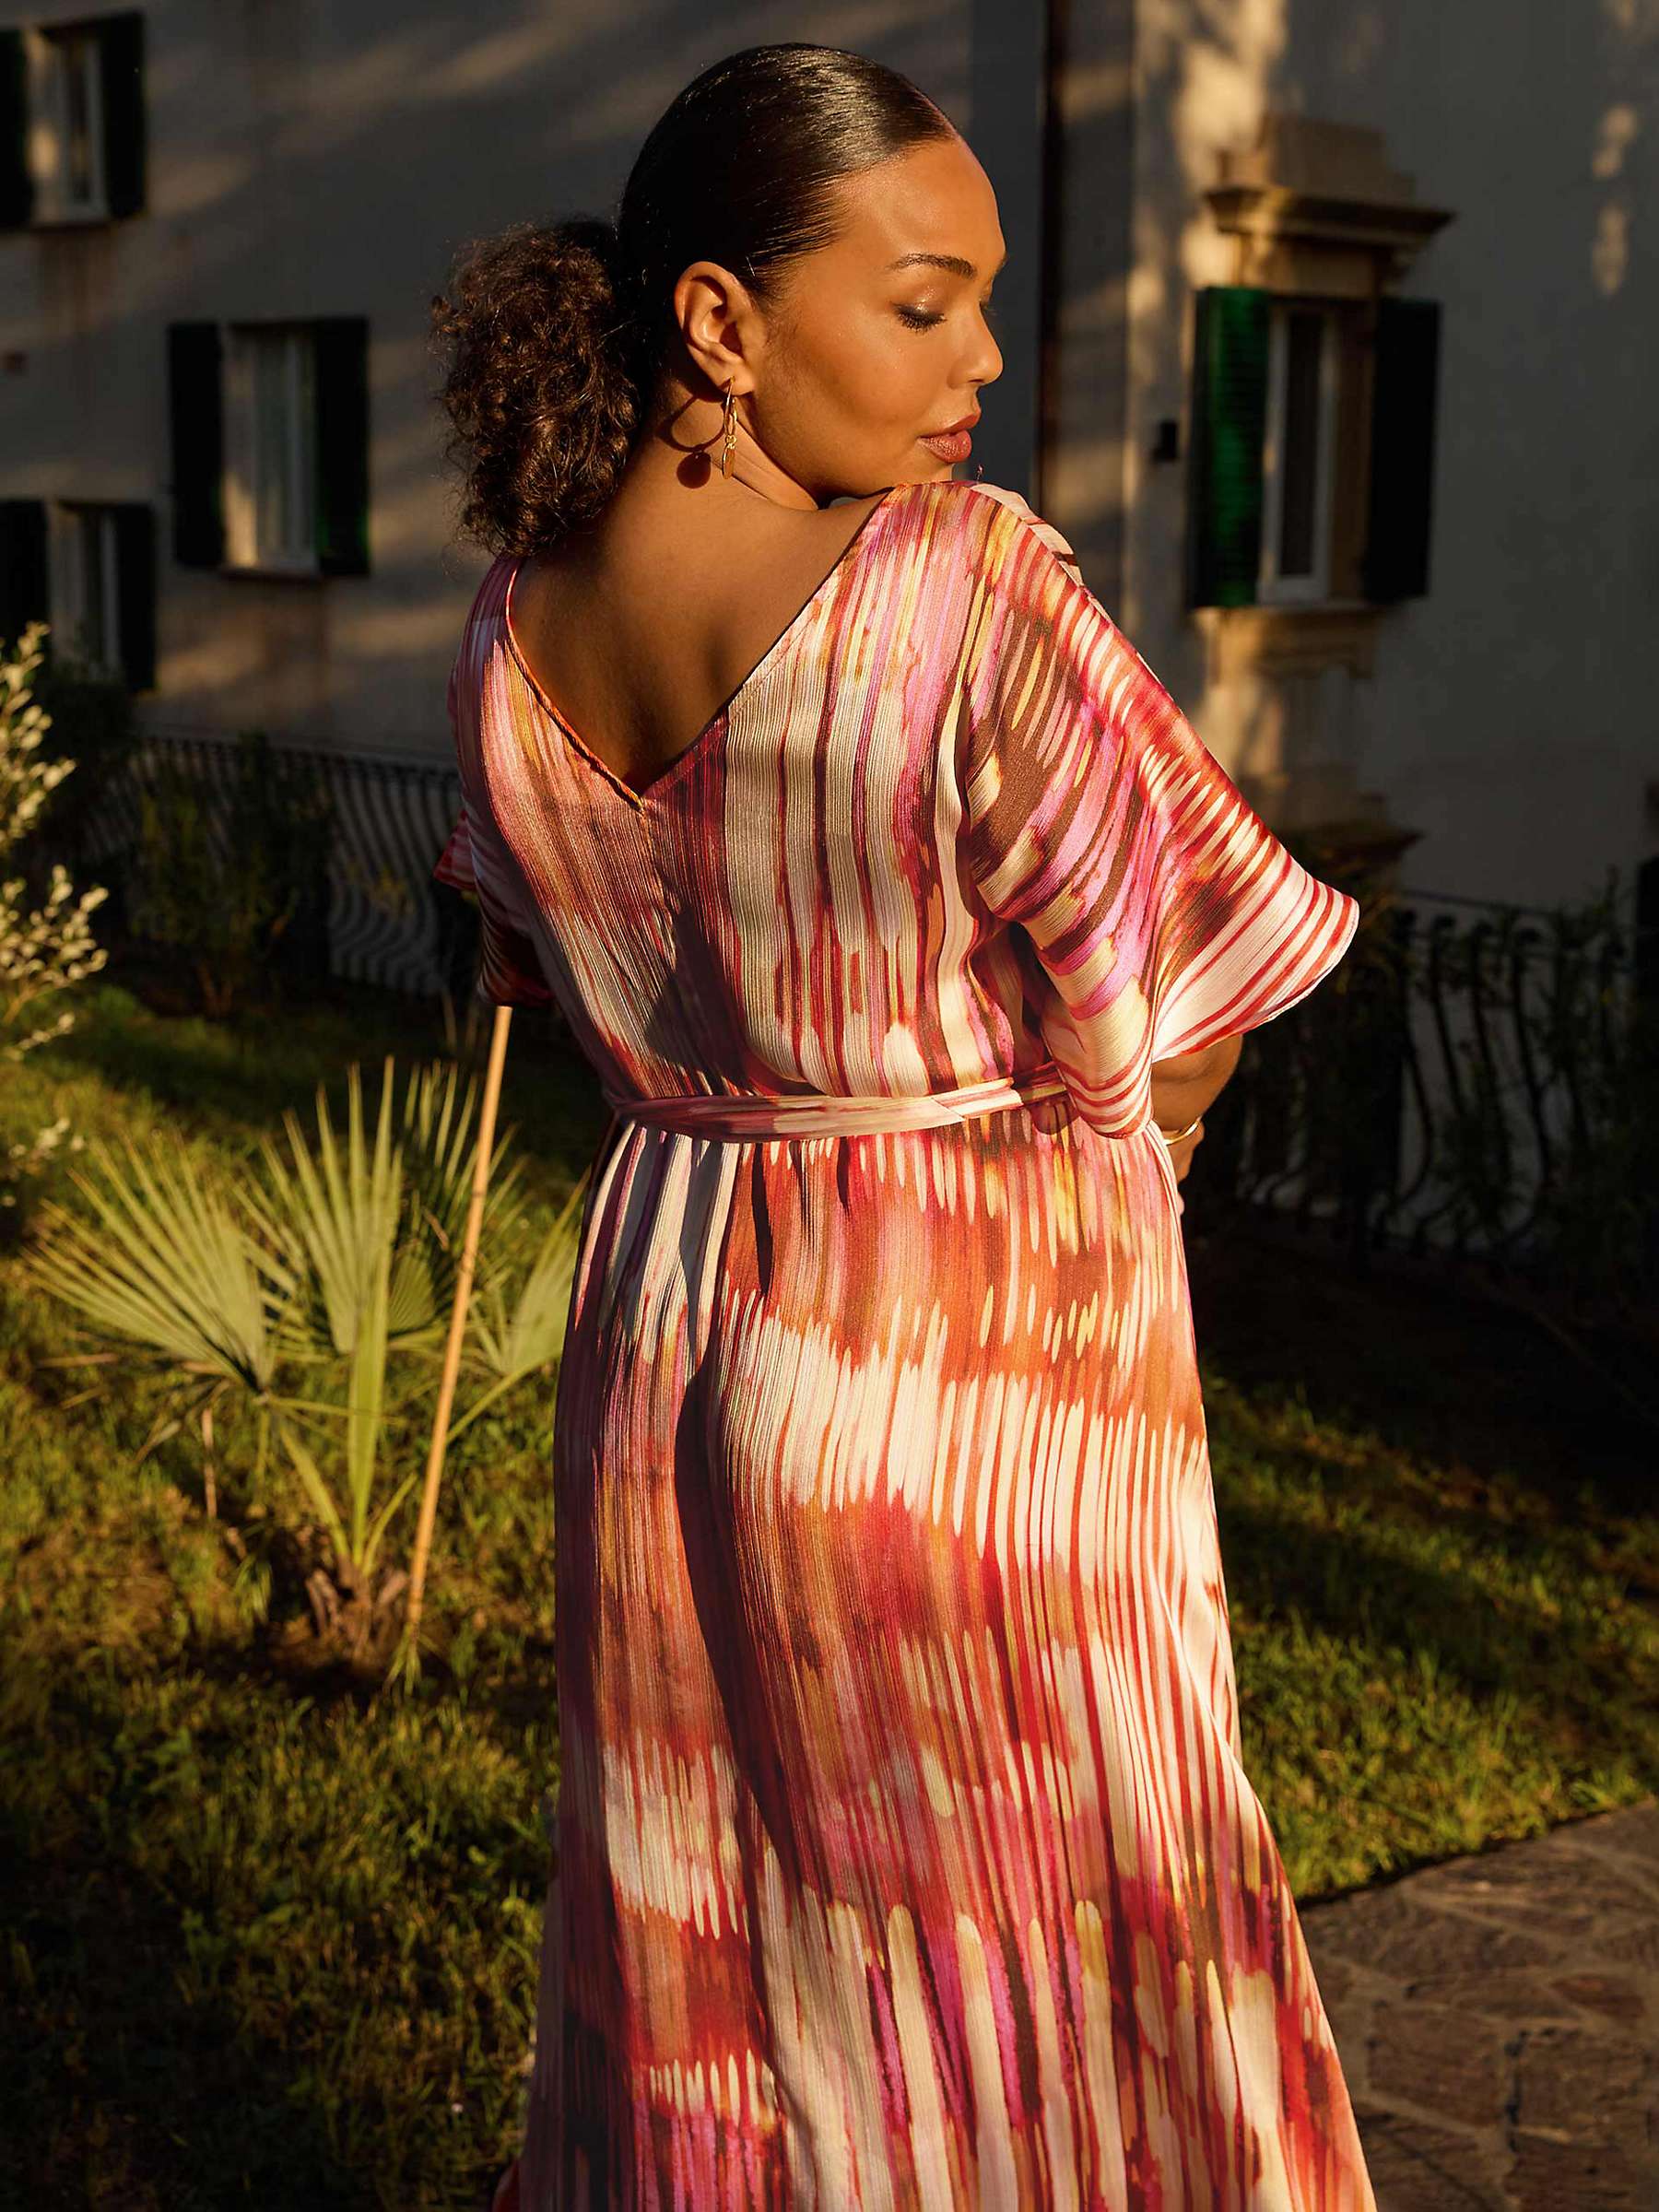 Buy Live Unlimited Curve Tie Dye Kimono Belted Dress, Pink/Multi Online at johnlewis.com